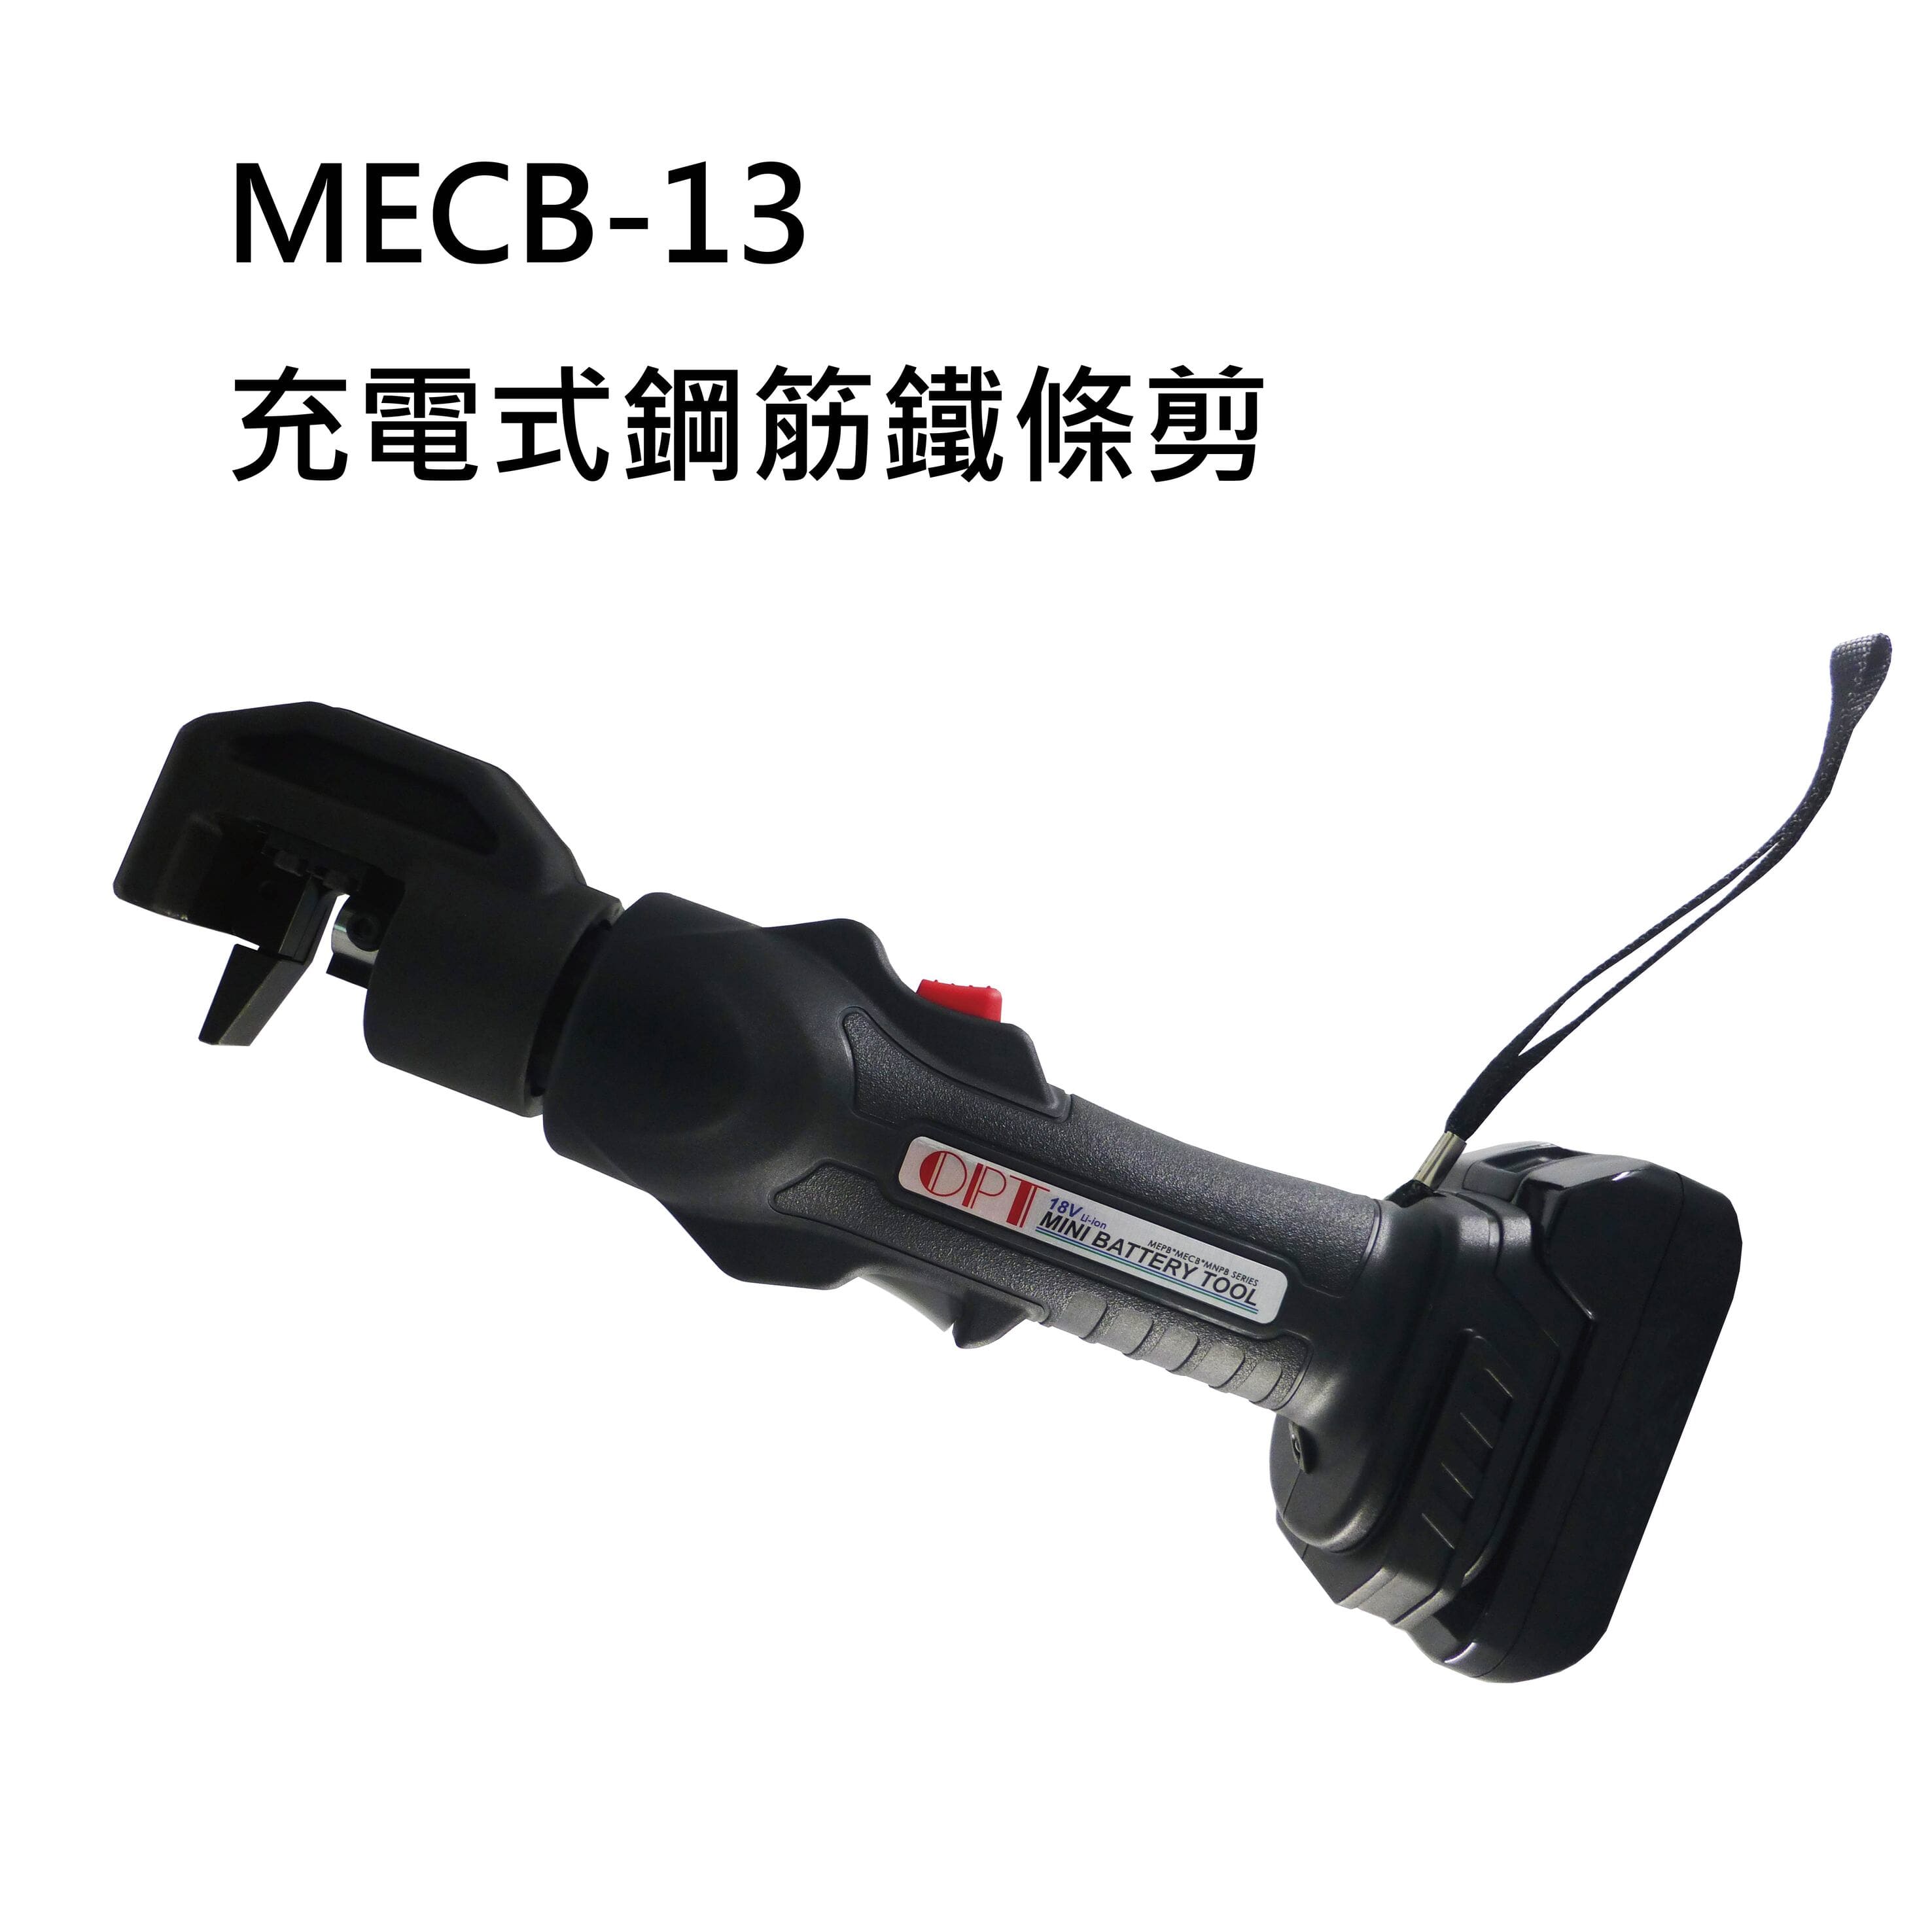 MECB-13 CORDLESS HYDRAULIC CABLE CUTTERS